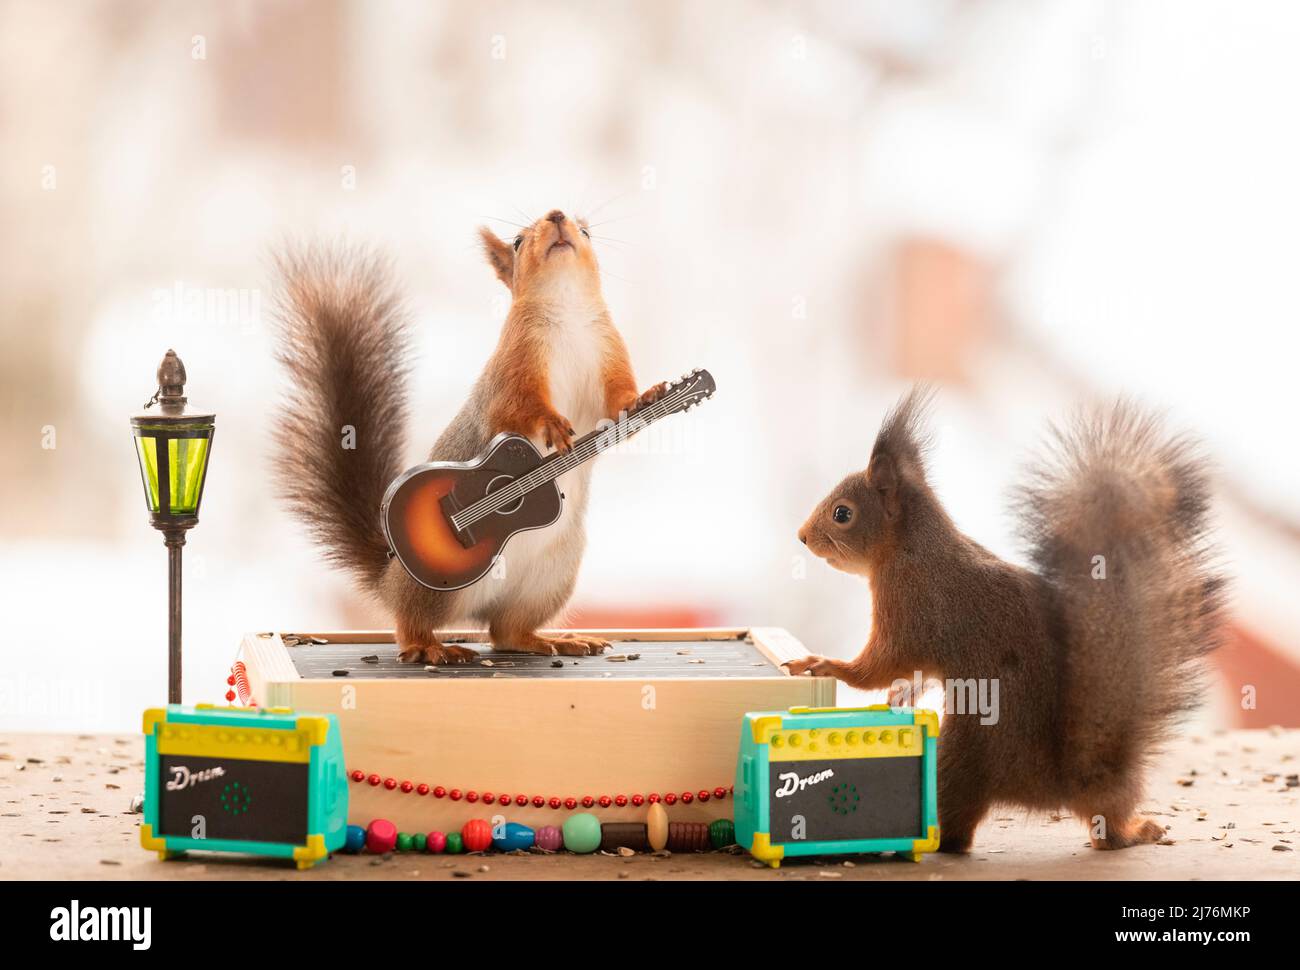 red squirrel is holding an guitar standing on podium Stock Photo